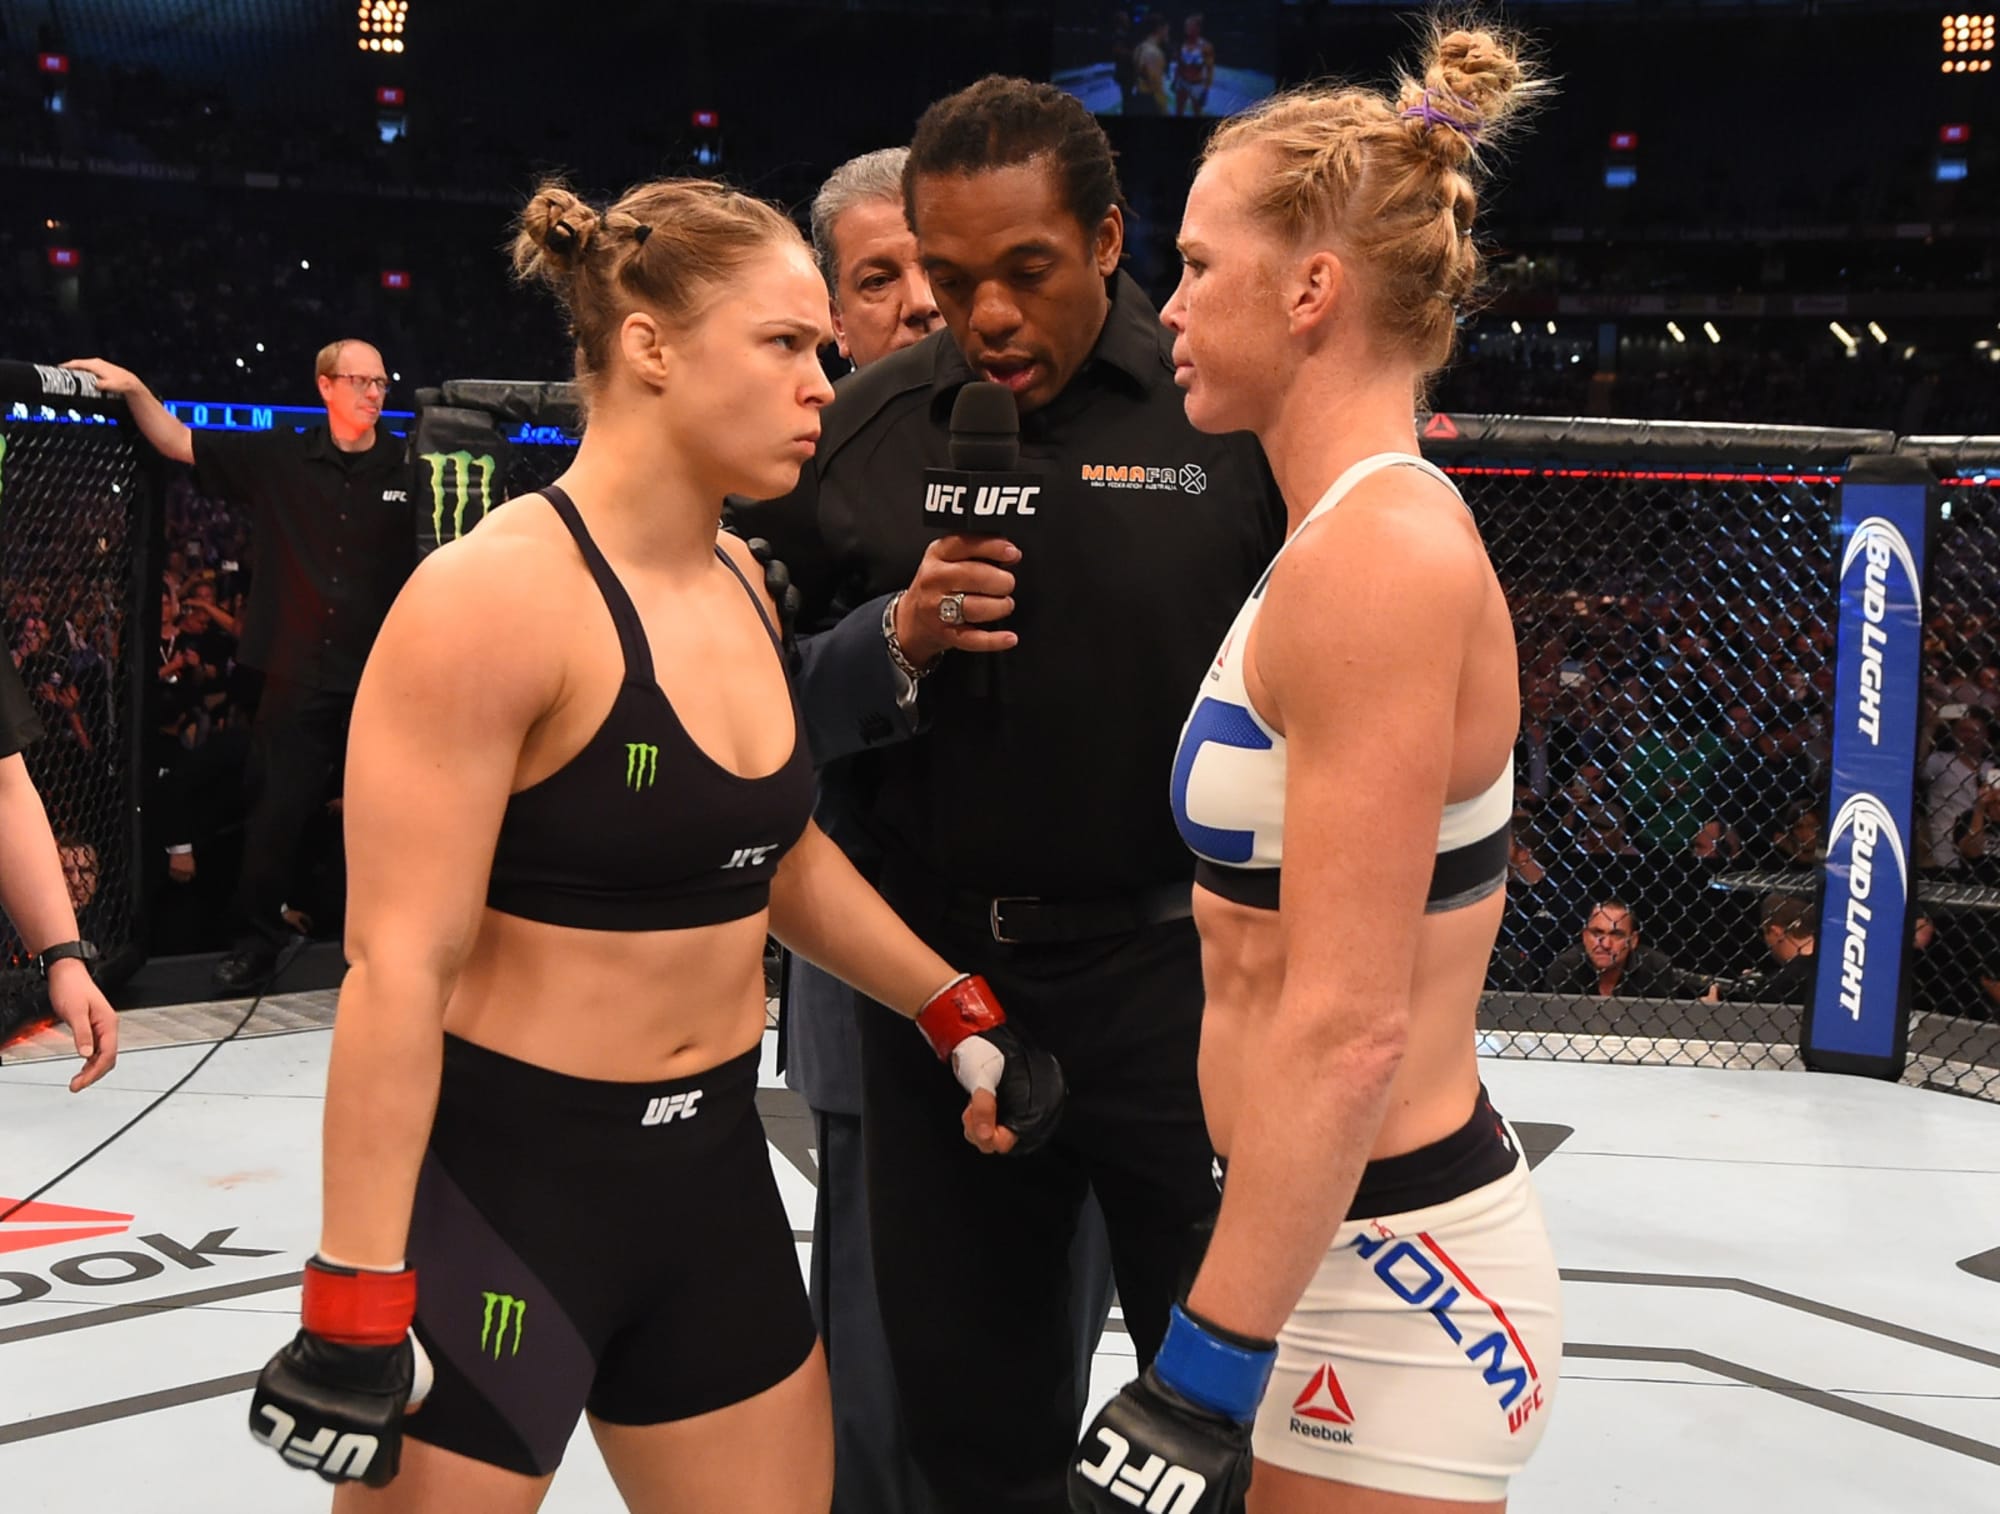 How Ronda Rousey vs. Holly Holm changed WMMA forever